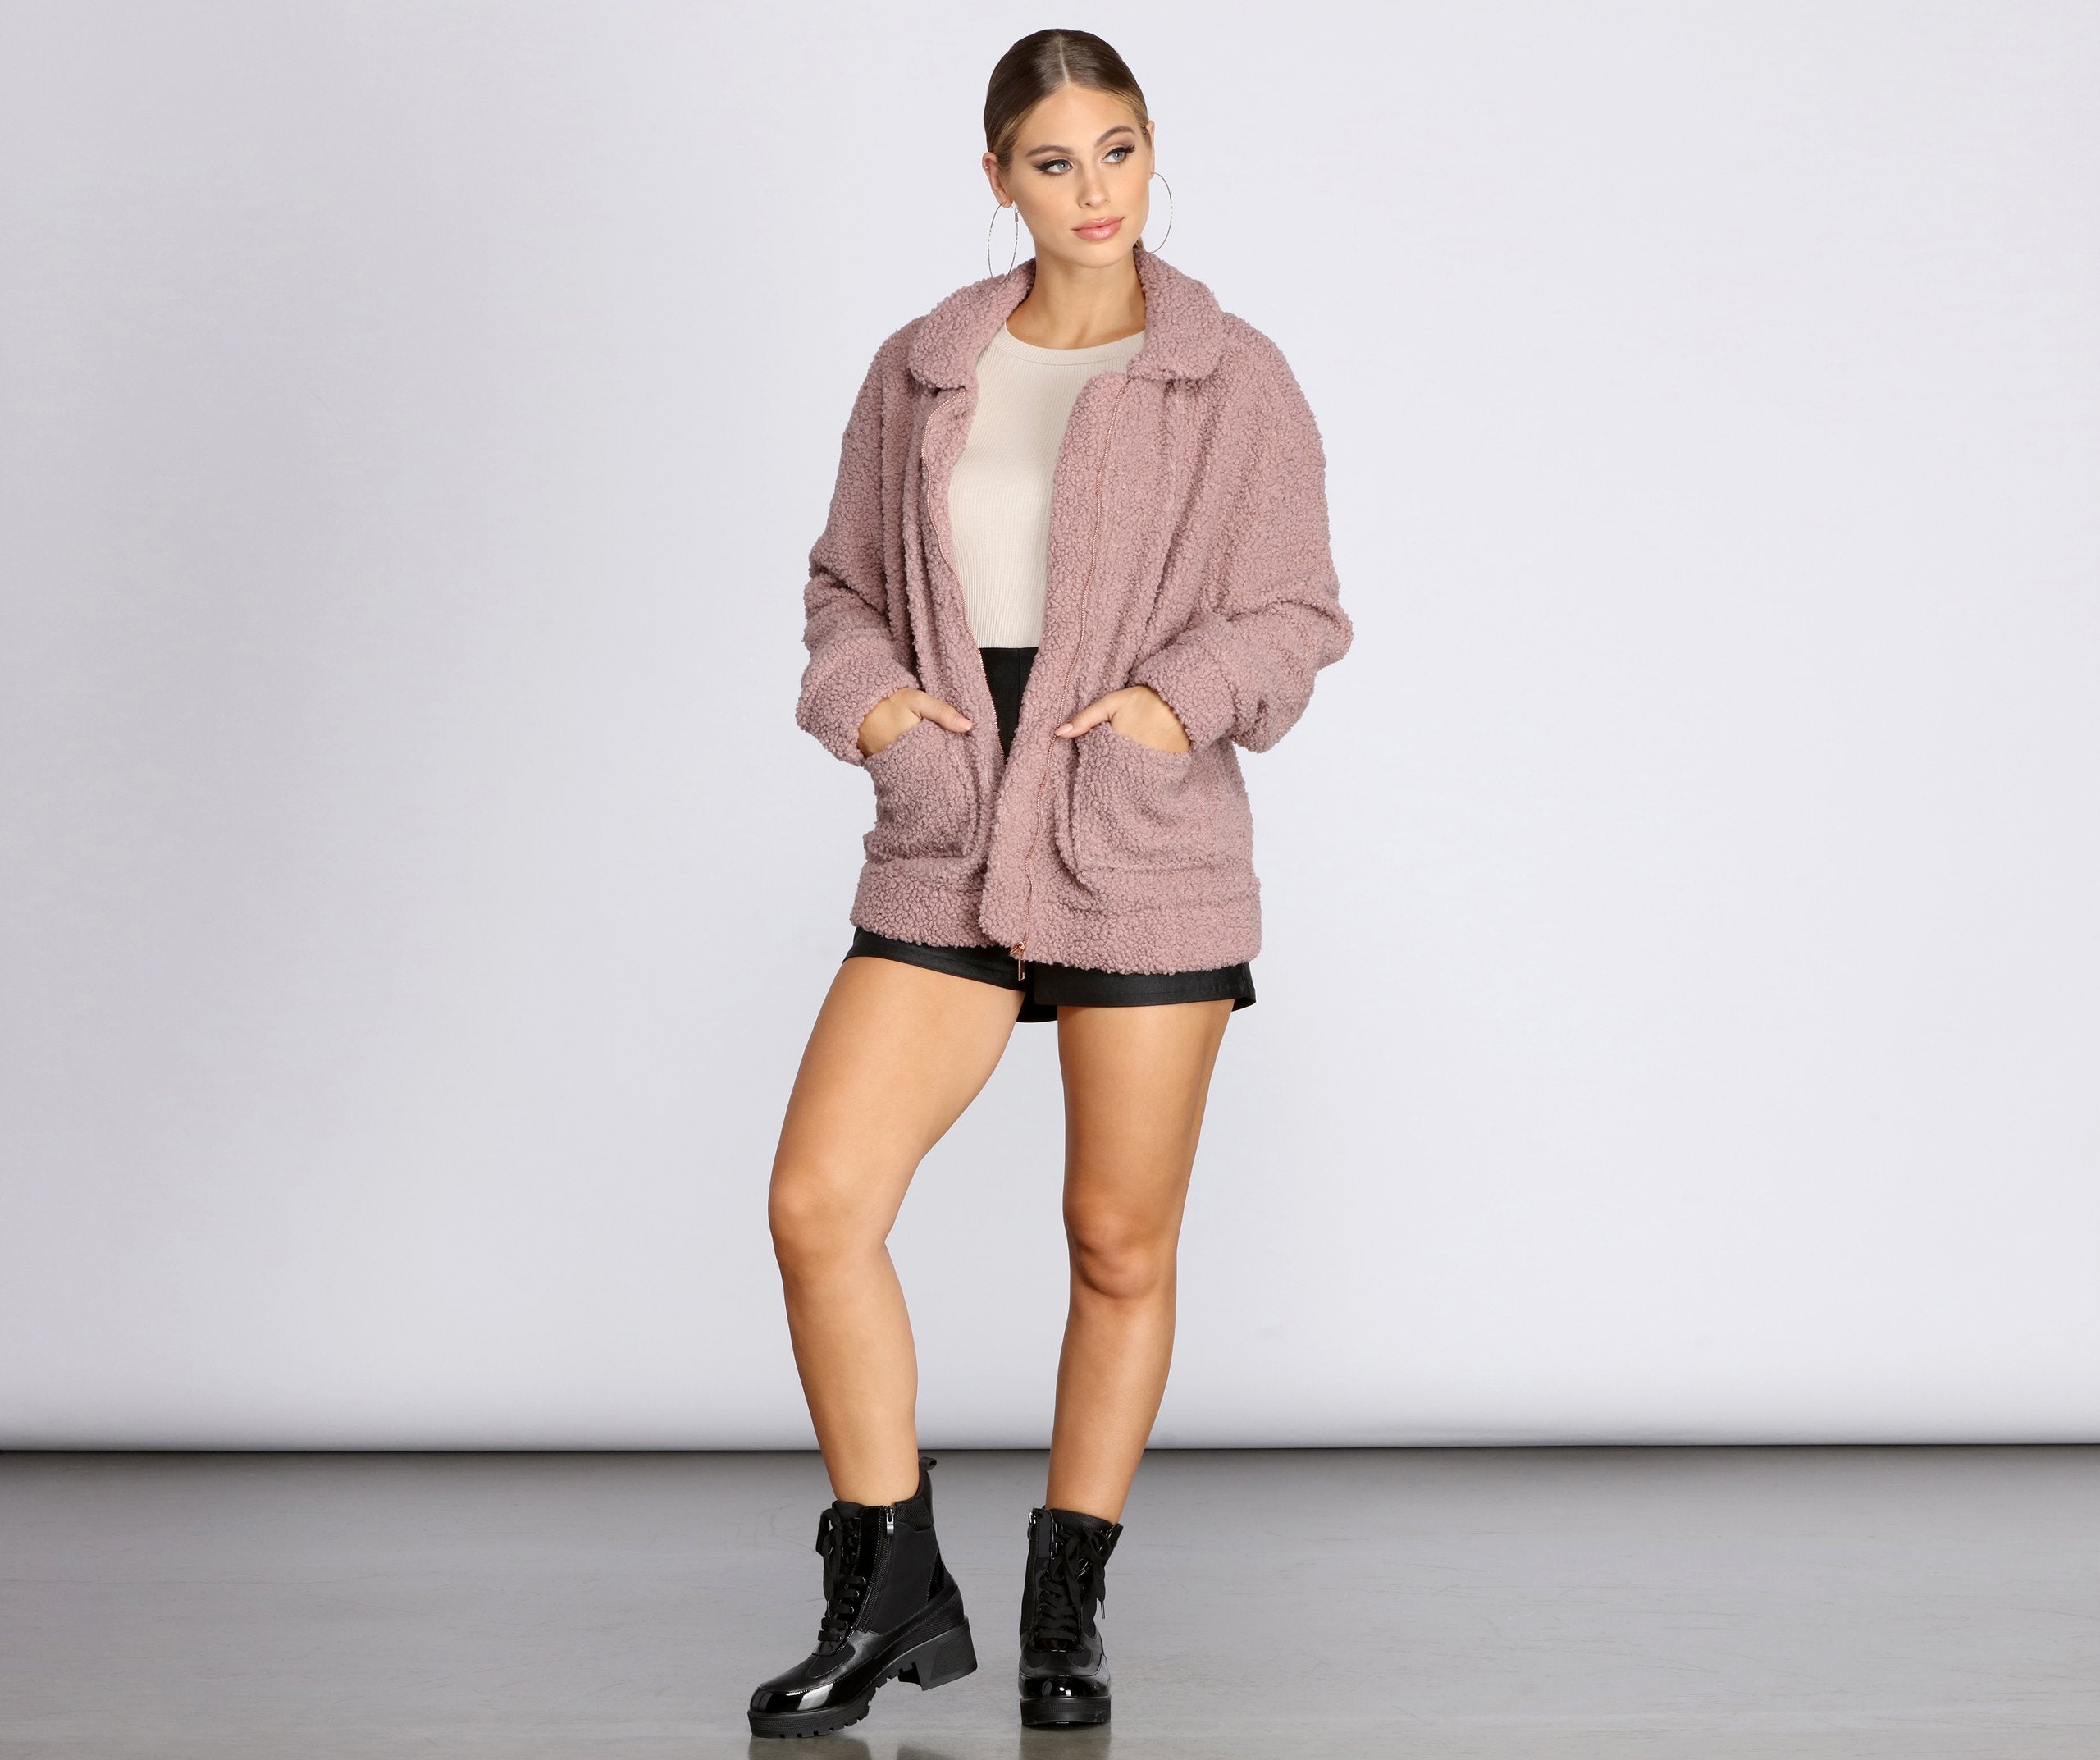 Oversized Teddy Jacket - Lady Occasions